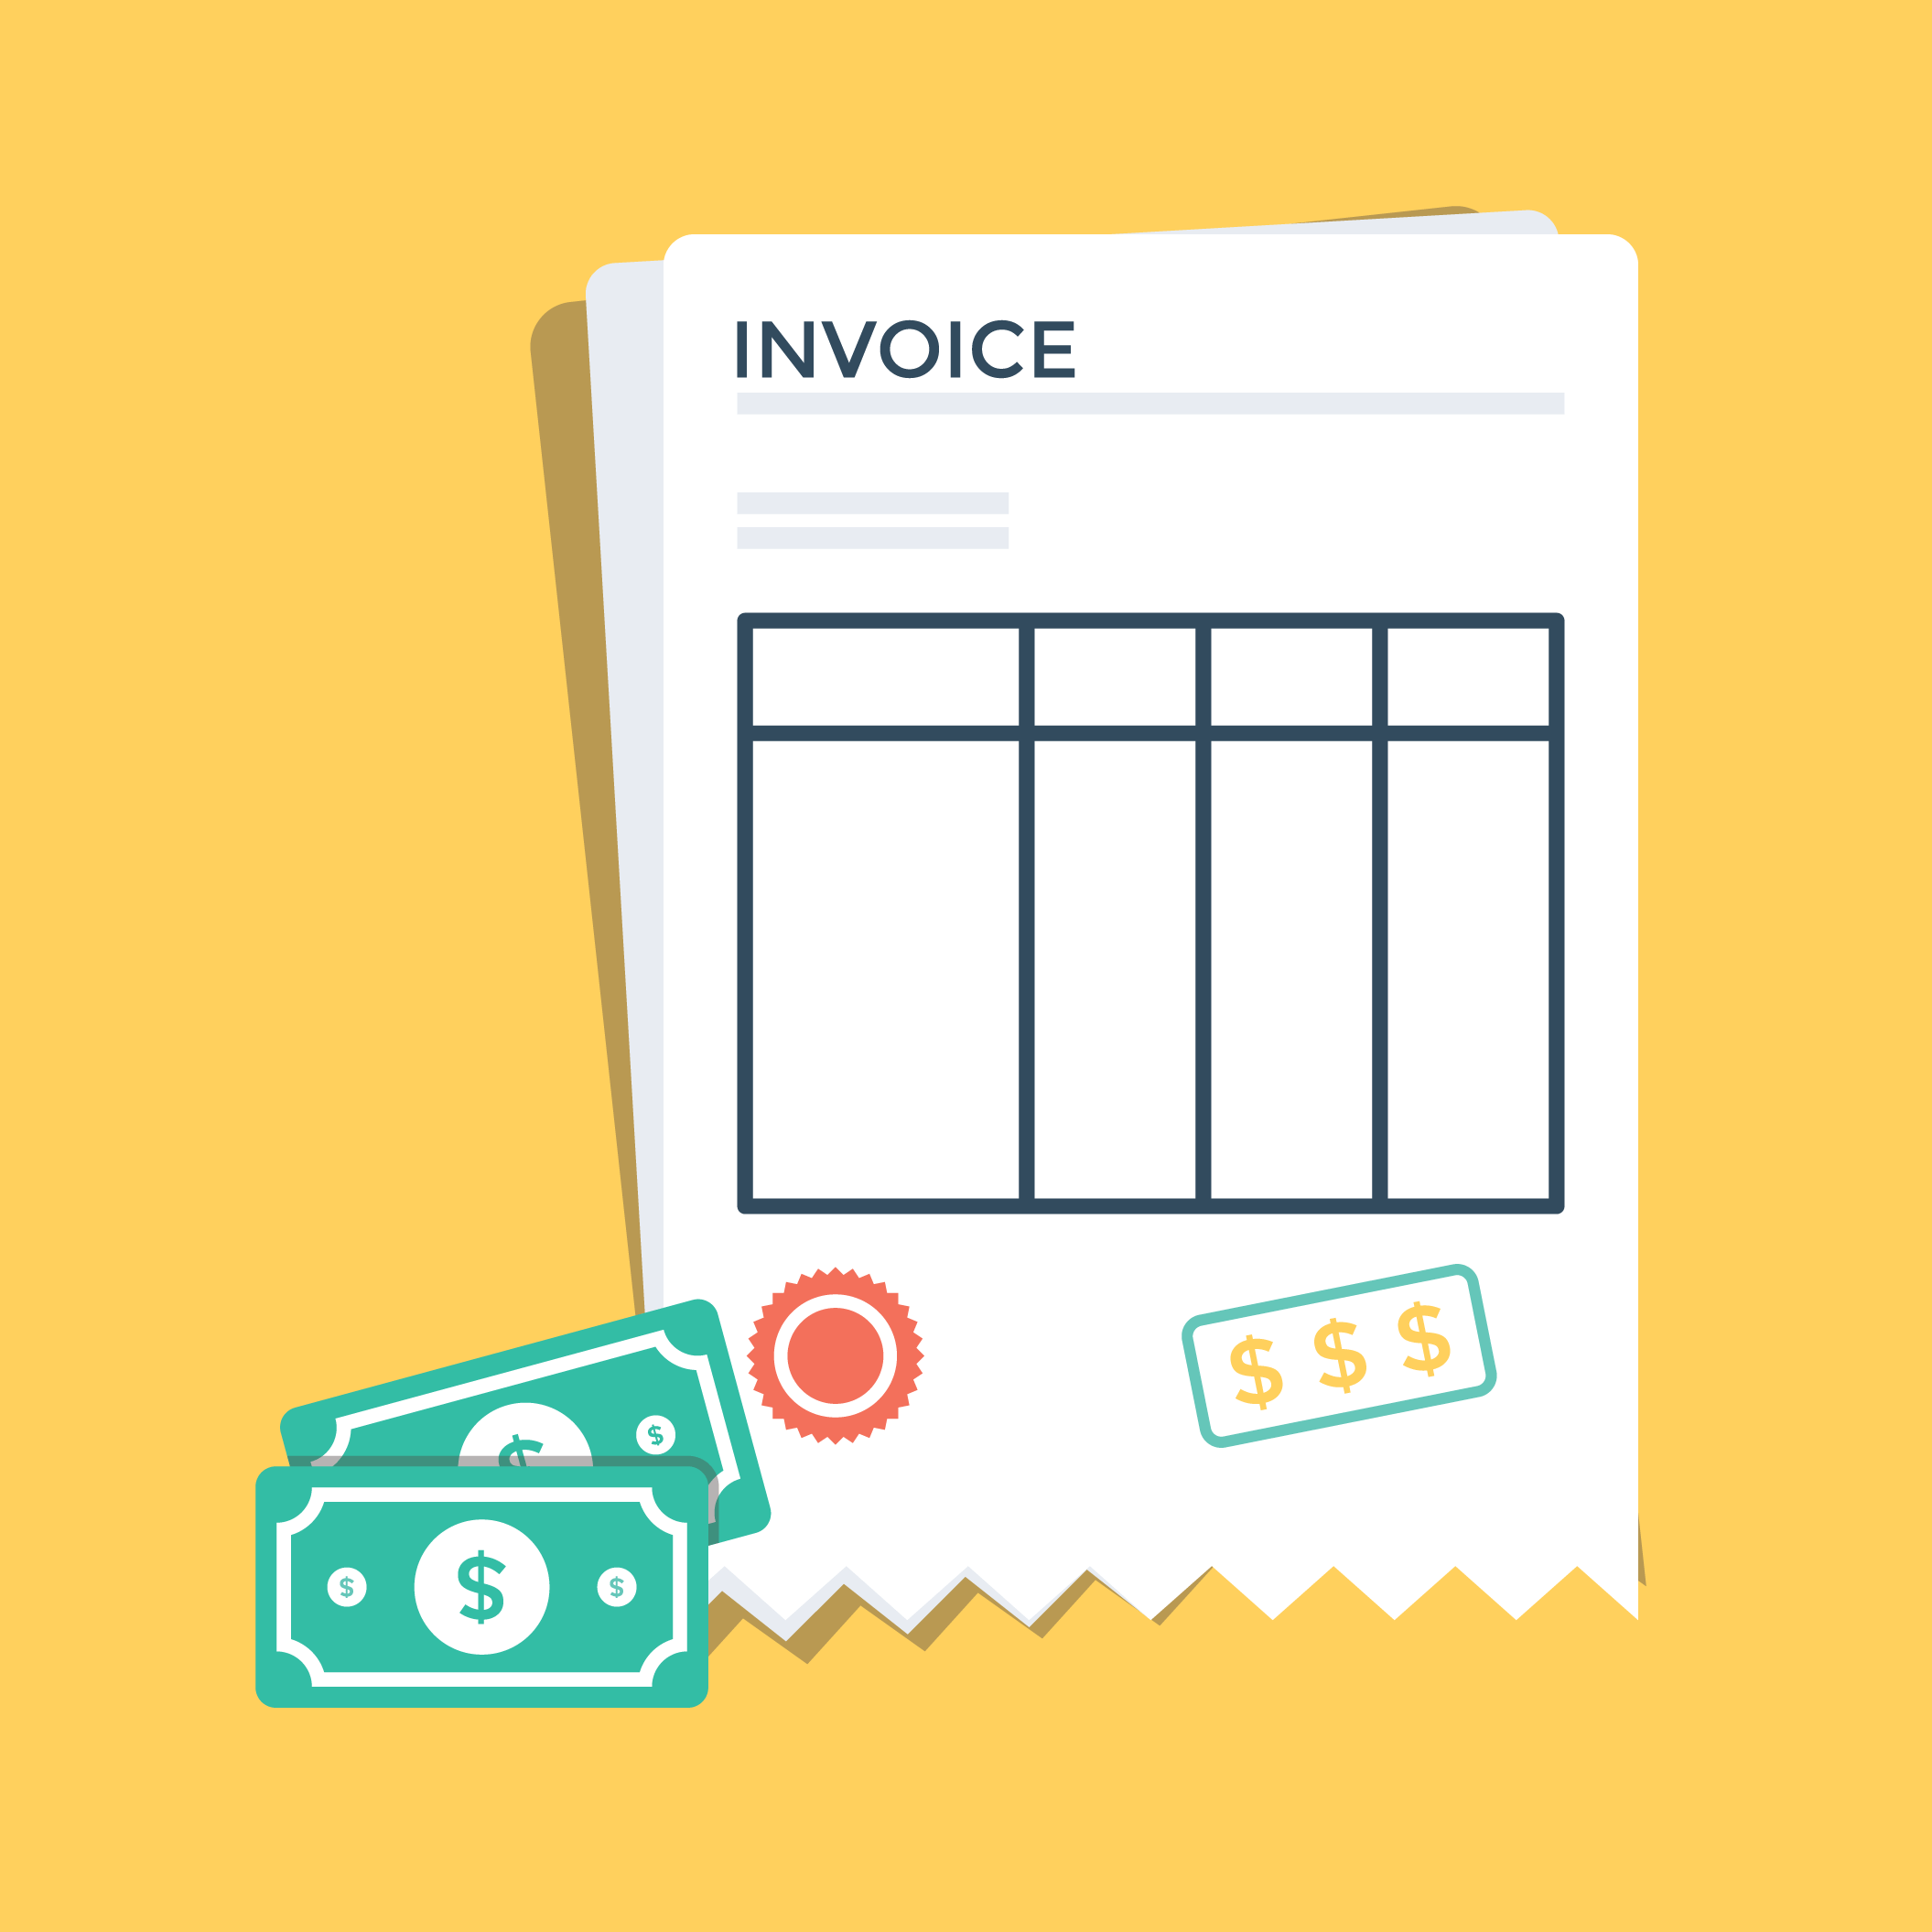 If you sell a domain, a buyer might want an invoice, here’s how to whip one up